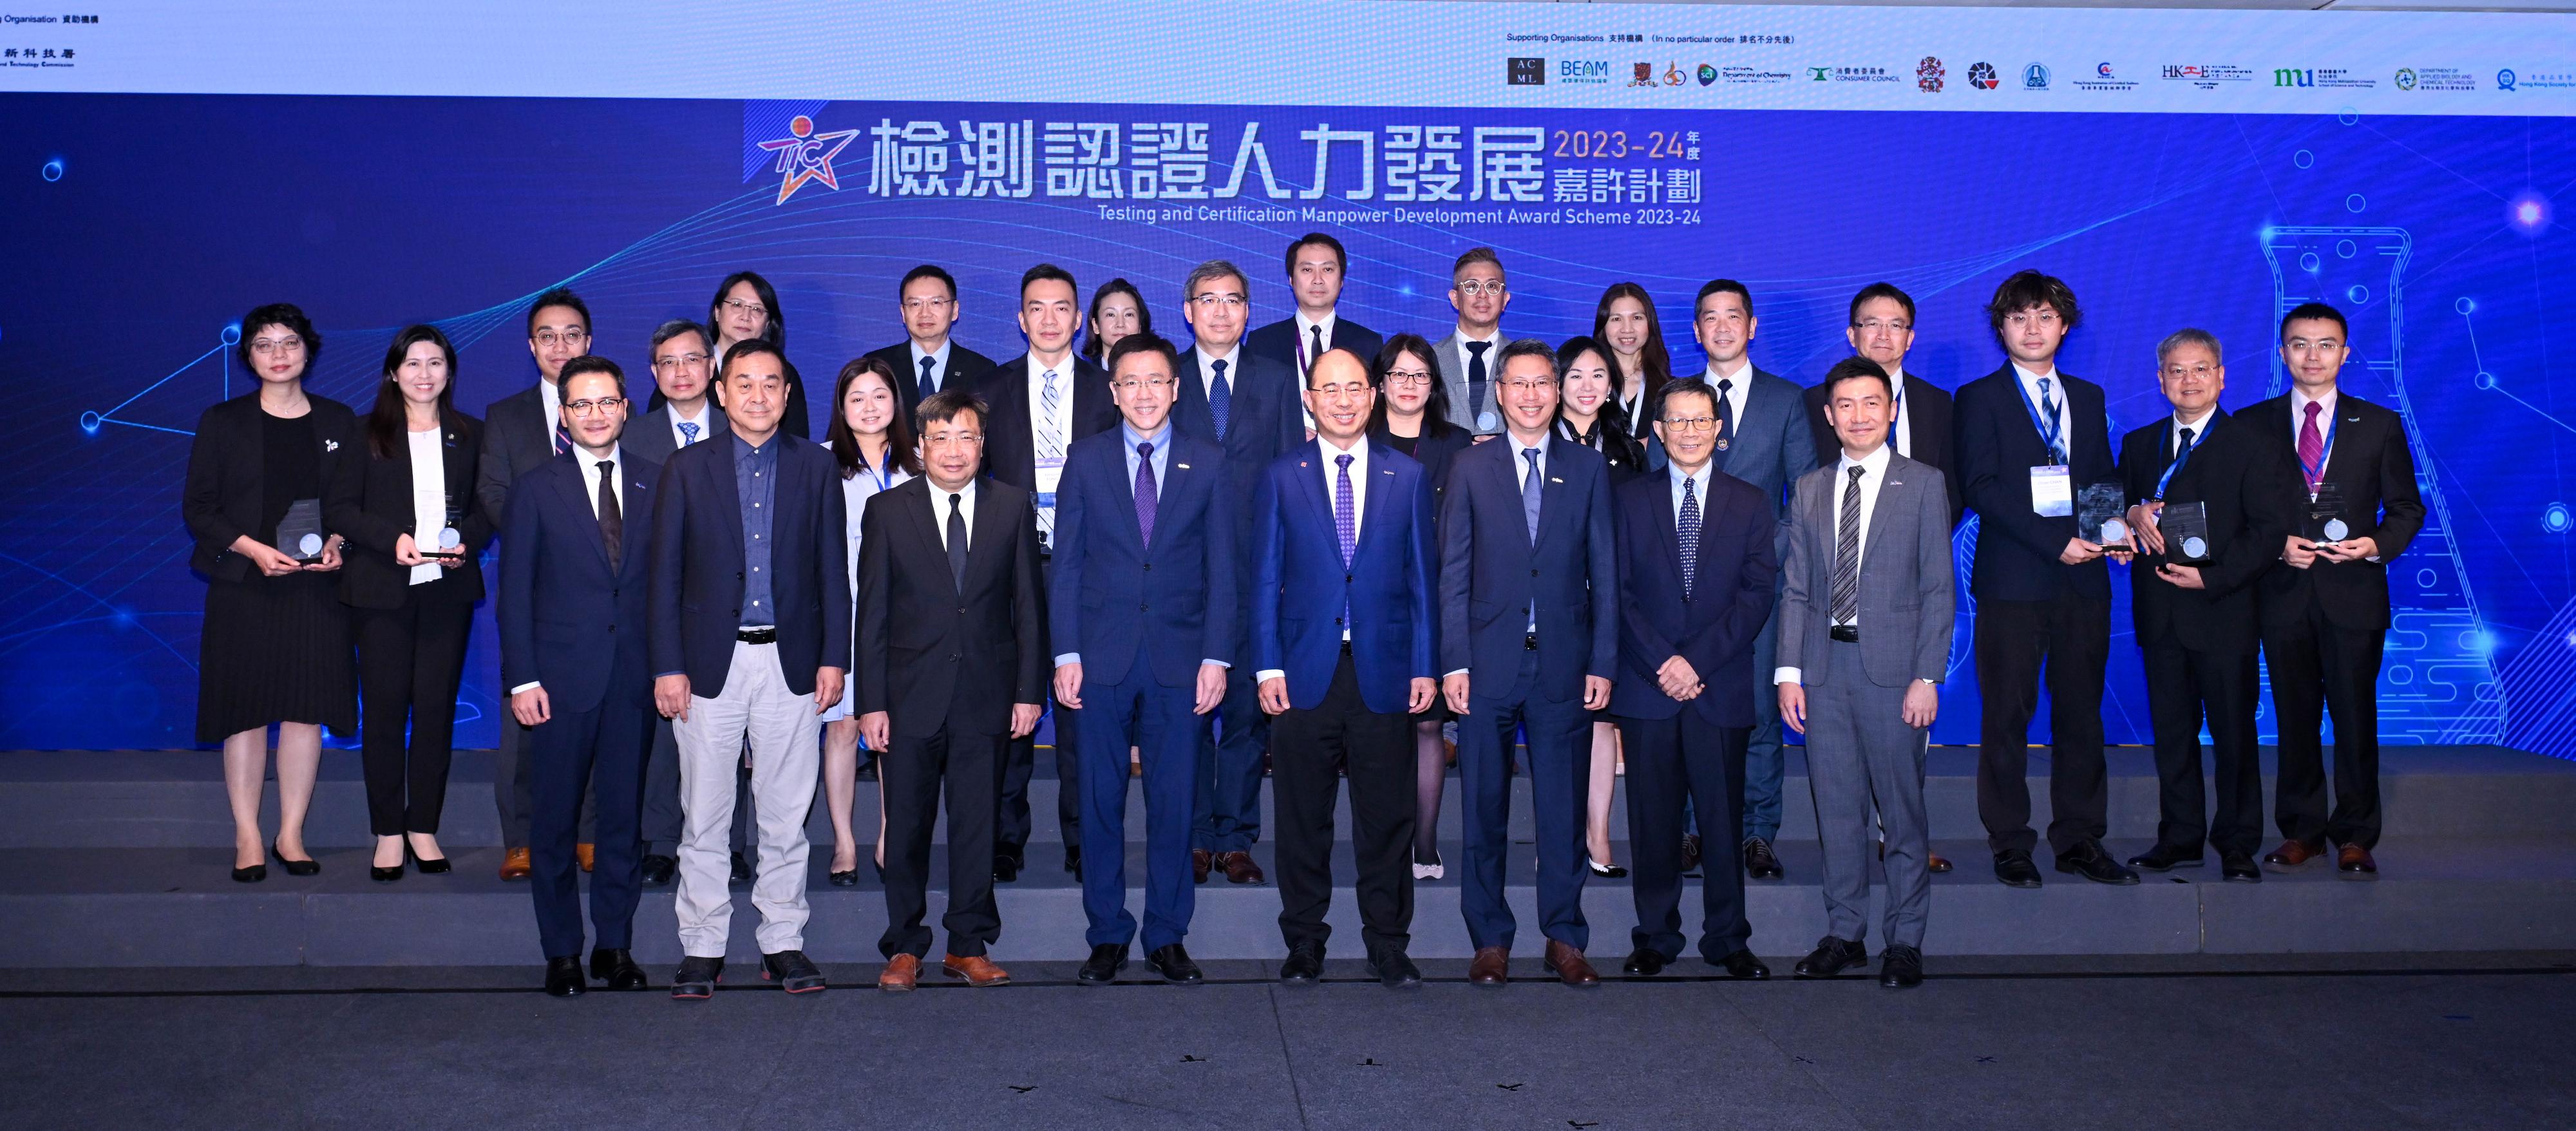 Organised by the Hong Kong Council for Testing and Certification (HKCTC) with full support from the Innovation and Technology Commission, the Testing and Certification Manpower Development Award Scheme 2023-24 award presentation ceremony was held today (December 4). Photo shows the Secretary for Innovation, Technology and Industry, Professor Sun Dong (front row, fourth left); the Permanent Secretary for Innovation, Technology and Industry, Mr Eddie Mak (front row, third right); the Commissioner for Innovation and Technology, Mr Ivan Lee (front row, third left); the Chairman of the HKCTC, Professor Wong Wing-tak (front row, fourth right); the Assessment Panel Chairman, Mr Martin Fan (front row, first right), and other guests with the representatives of the Corporate Awardees (Platinum Award).